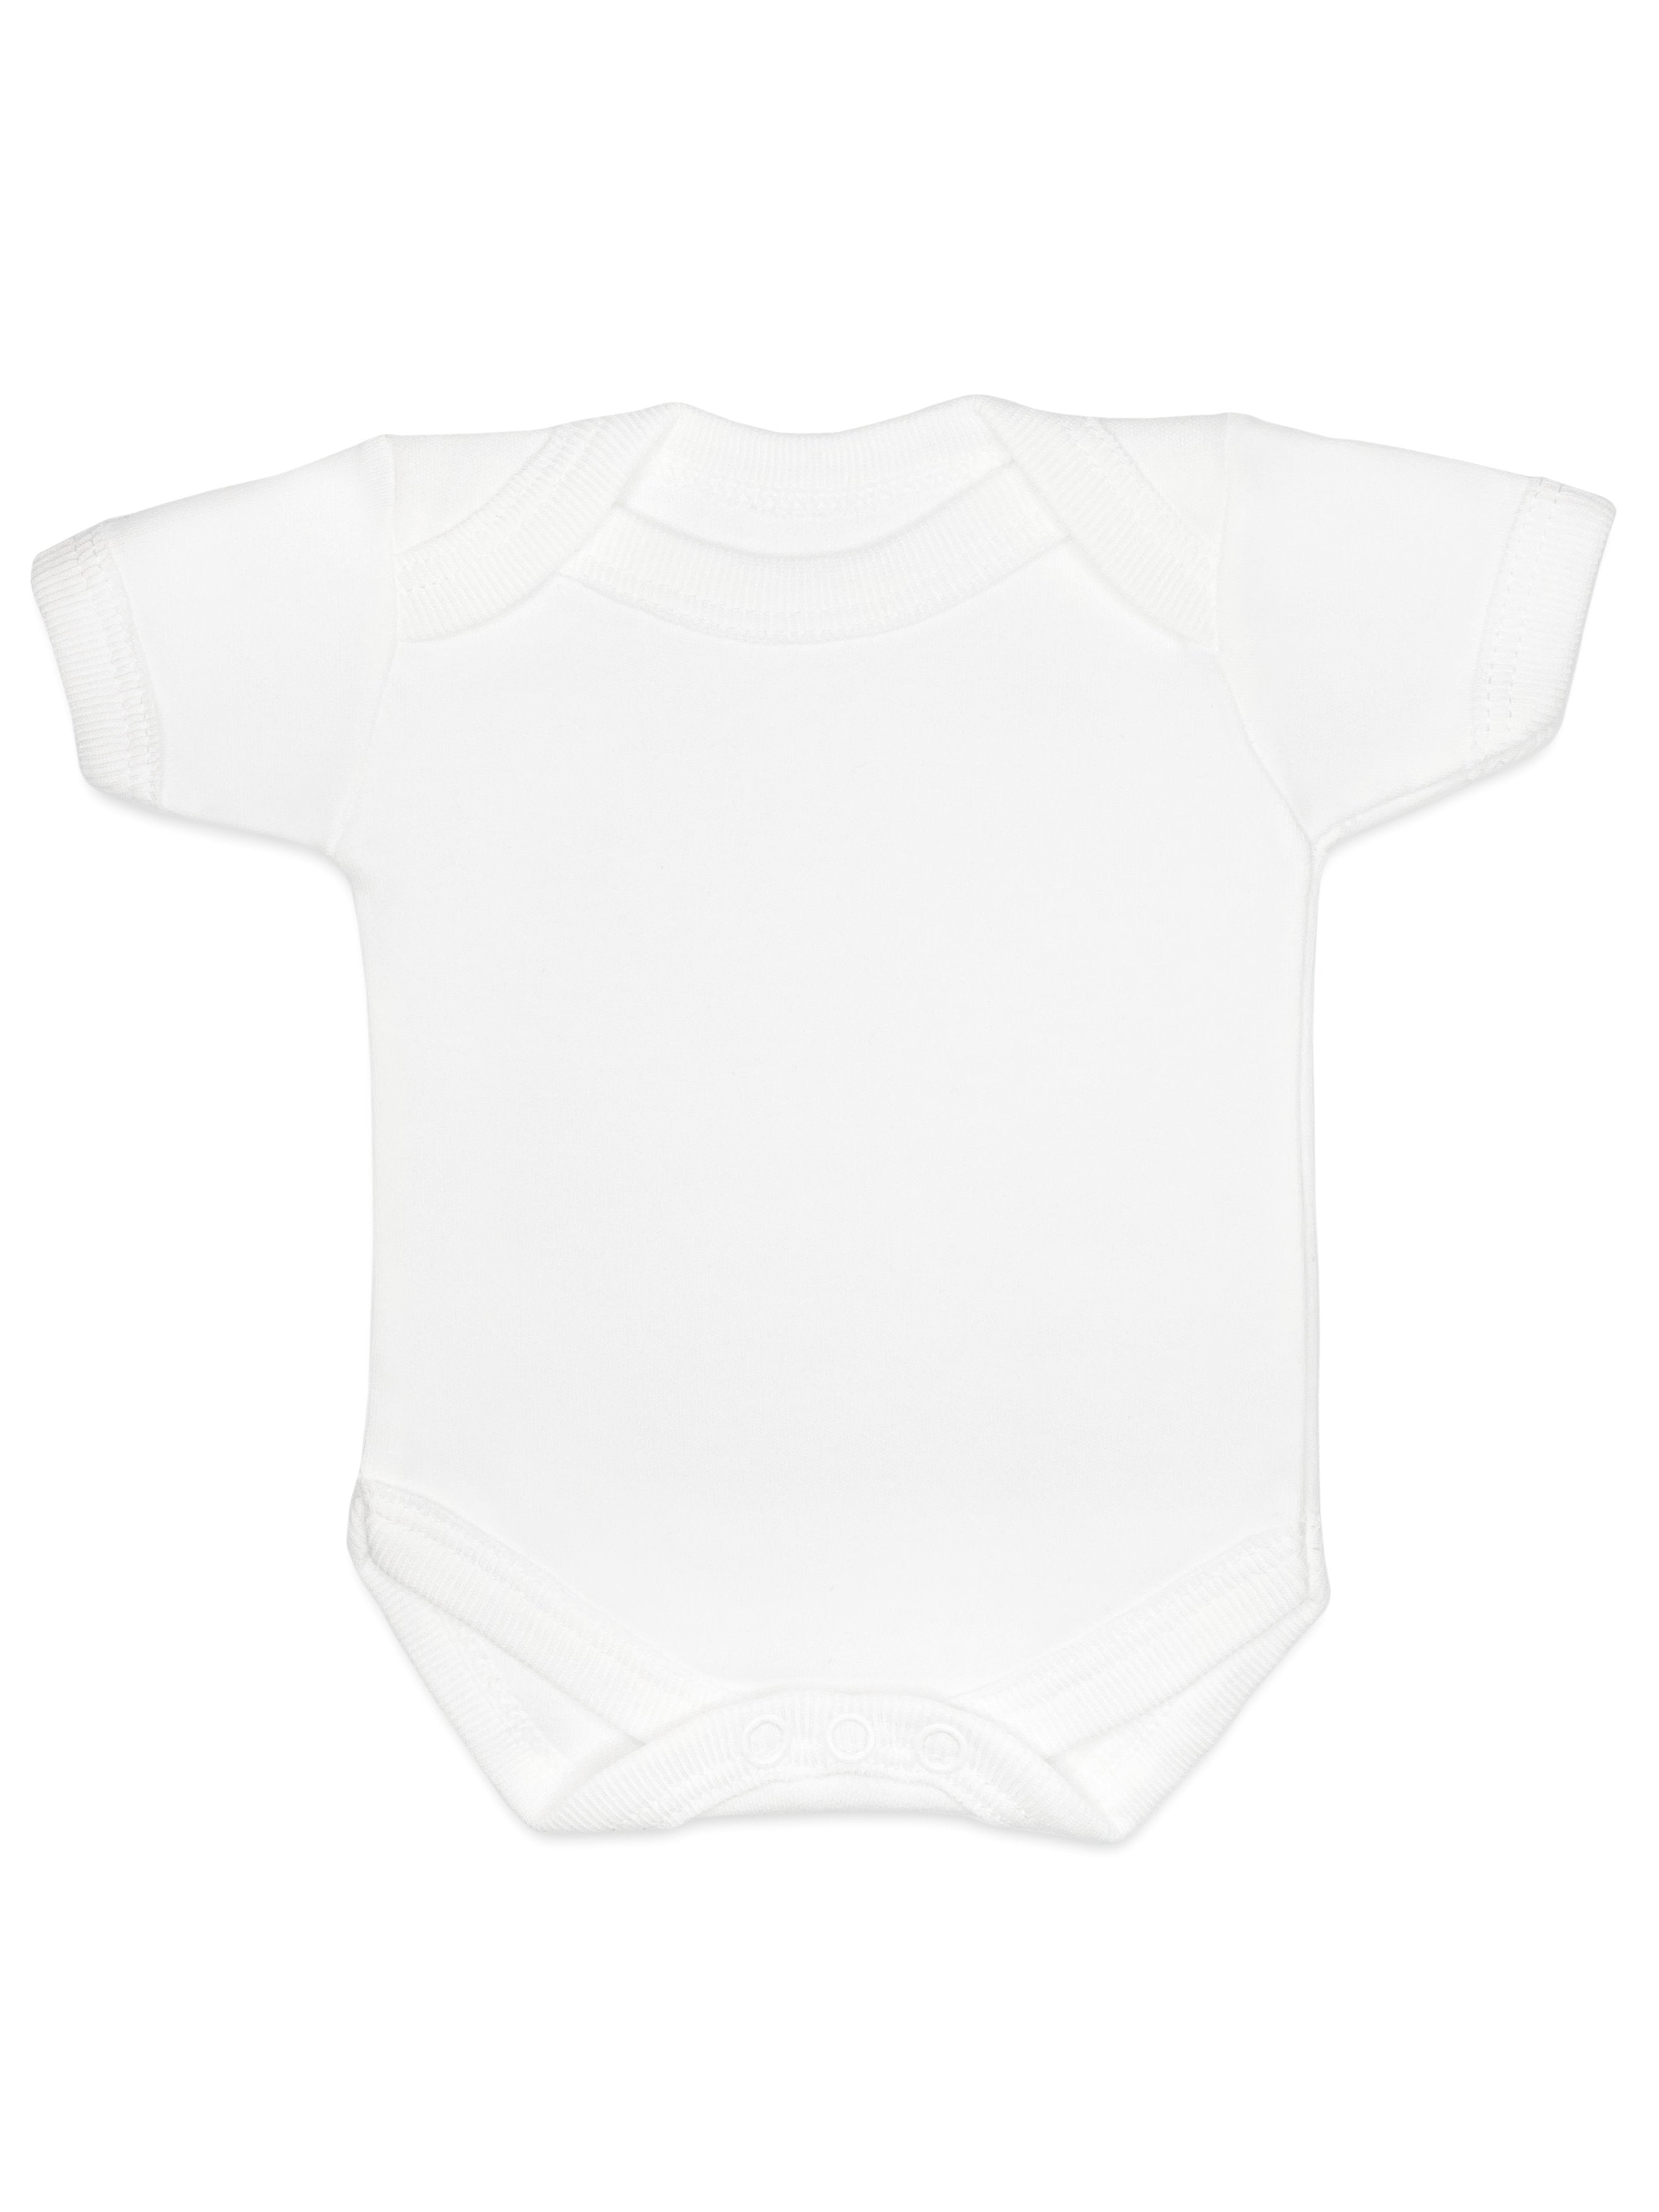 100% Cotton Classic White Short Sleeved Bodysuit (Early Baby, 3-5lb) - Bodysuit / Vest - Little Mouse Baby Clothing & Gifts